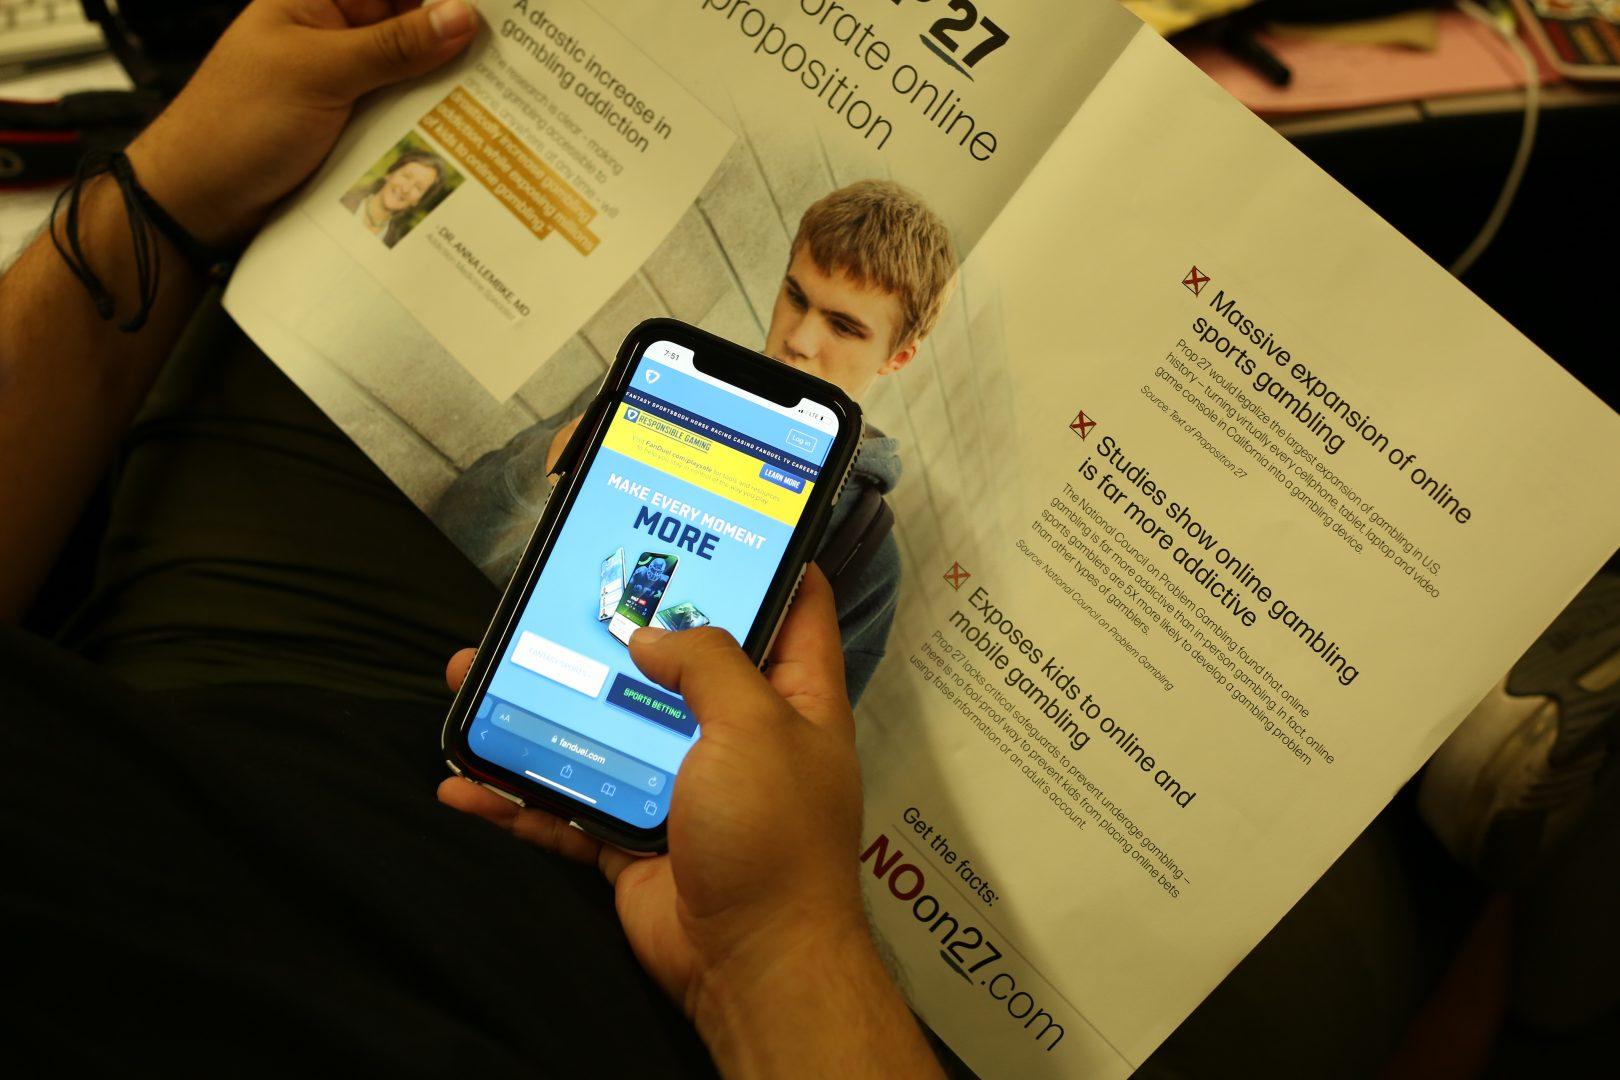 A pamphlet against Proposition 27 pictured with the mobile sports gambling app FanDuel. Propositions 27 and 26 will be on the ballot this November. (Ashley Flowers/The Collegian)